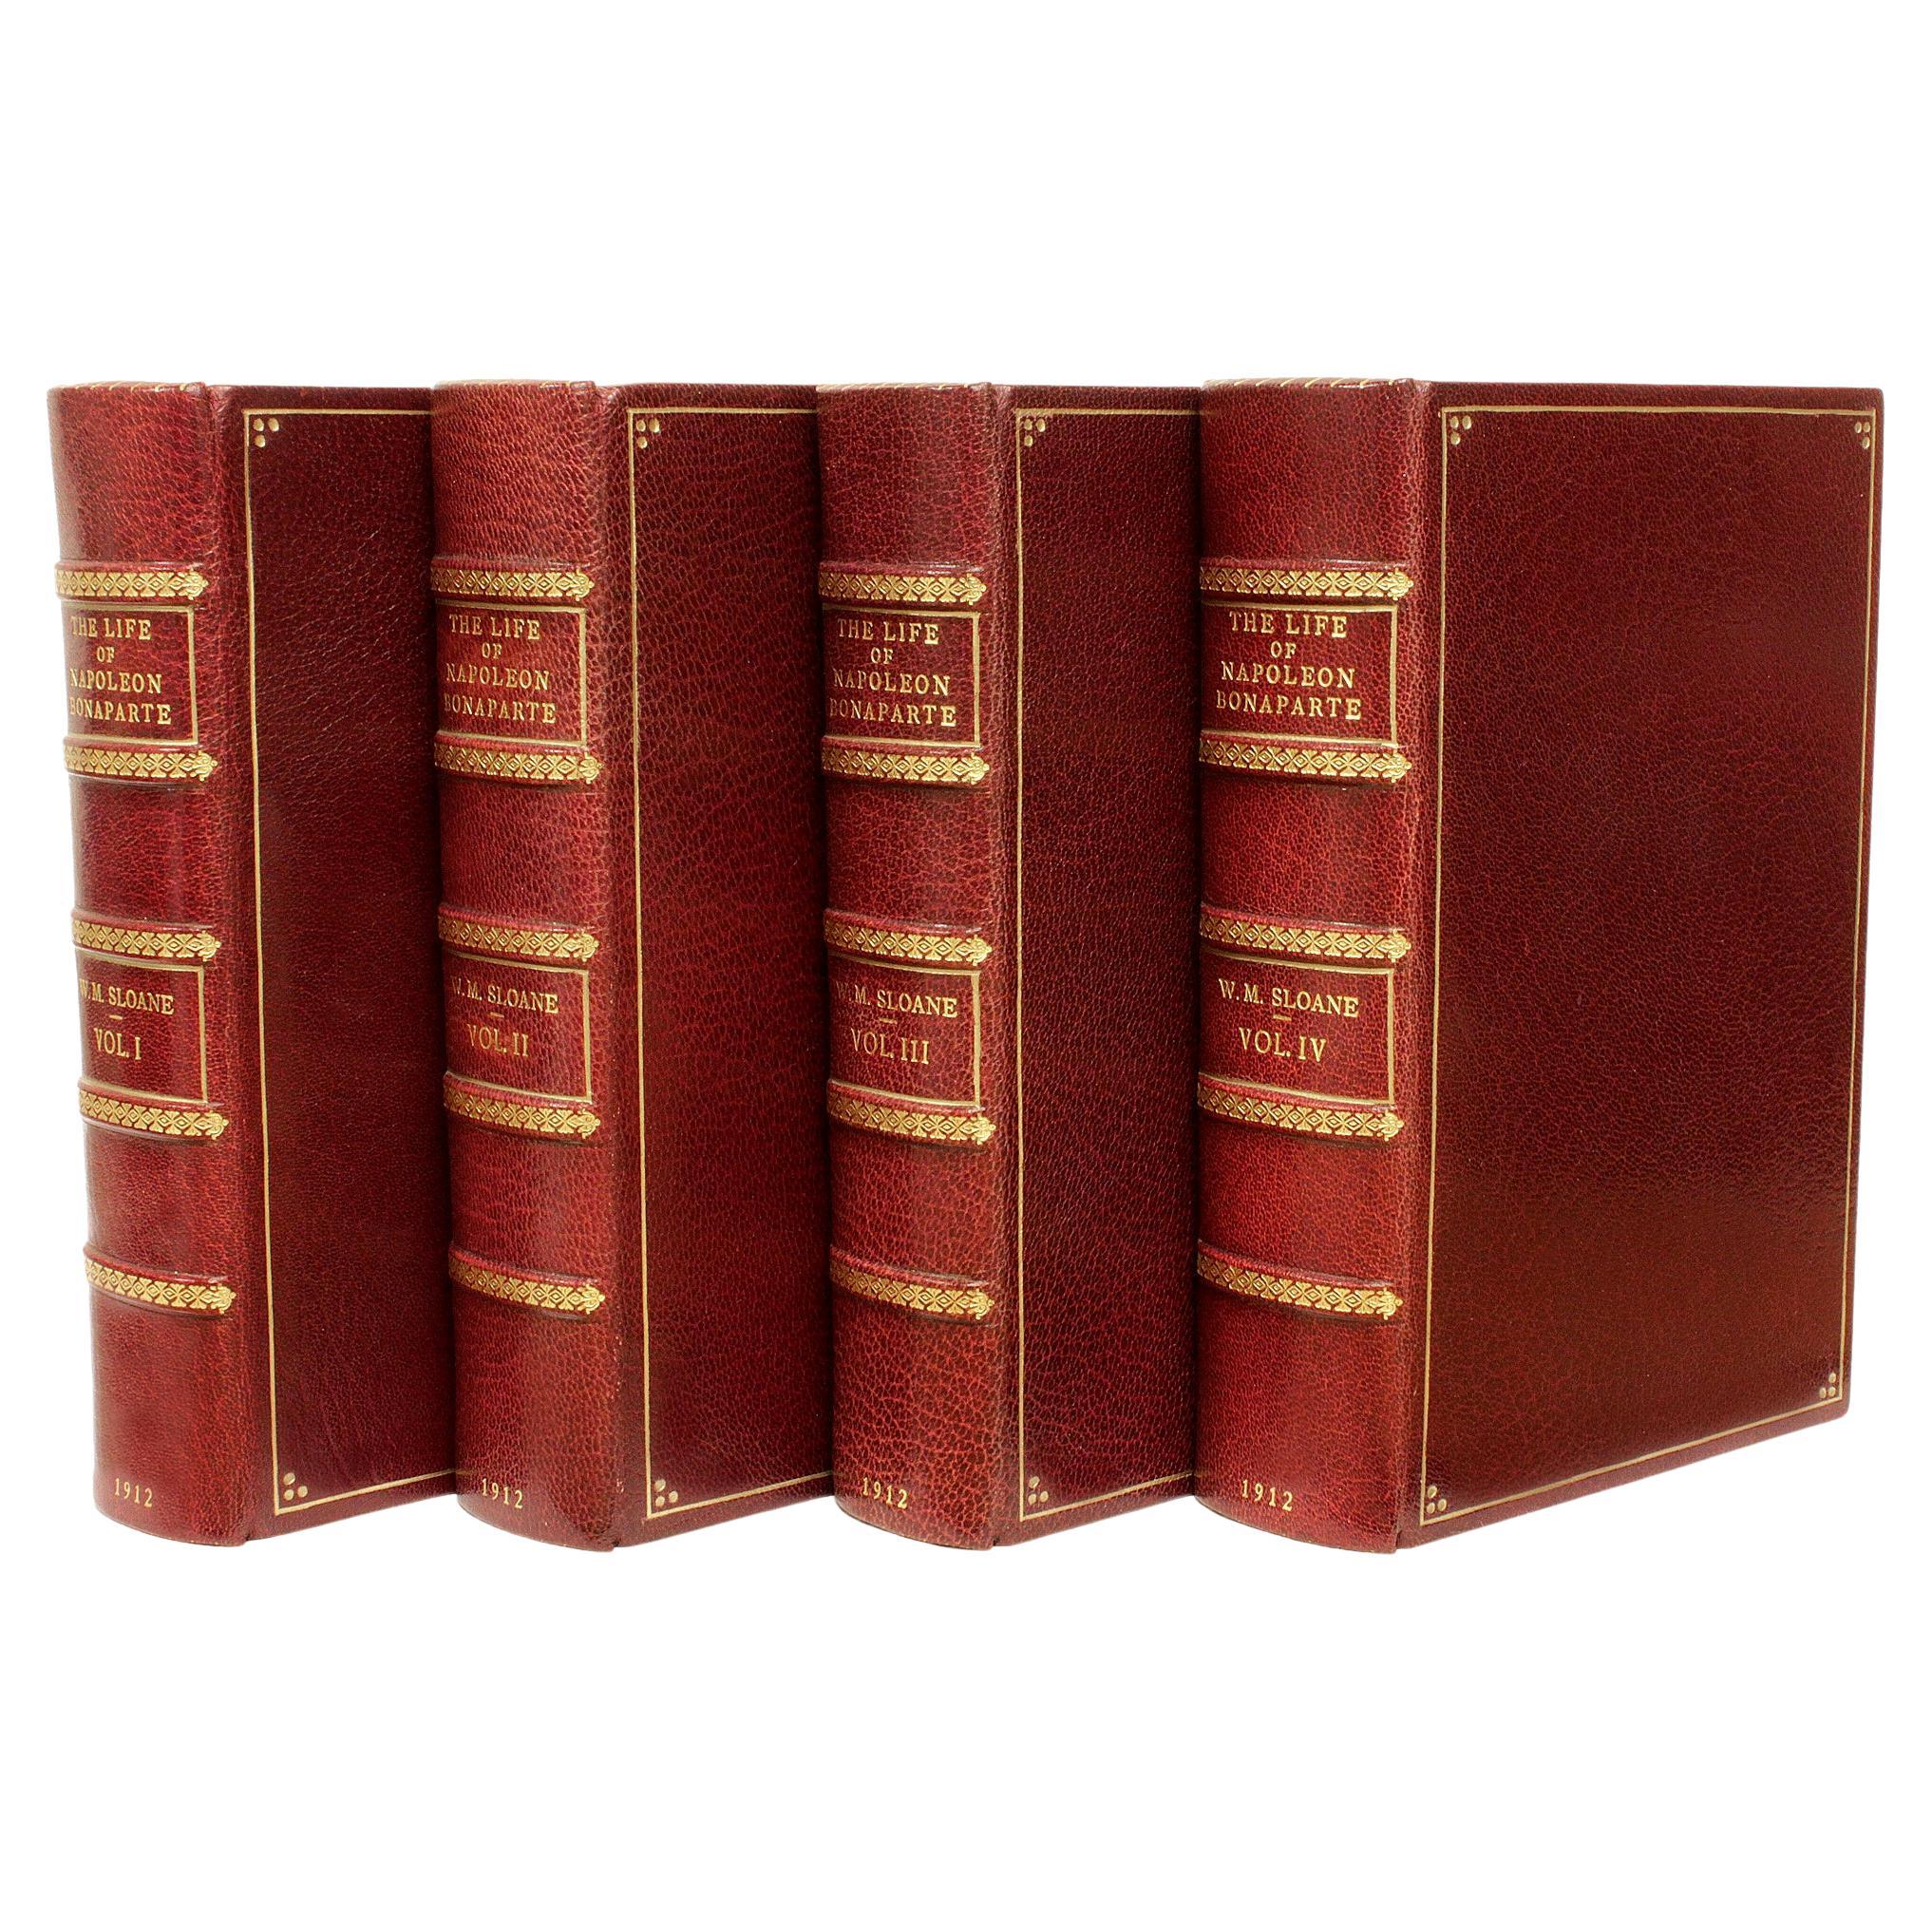 Sloane, the Life of Napoleon Bonaparte, New Revised Edition, in a Fine Binding